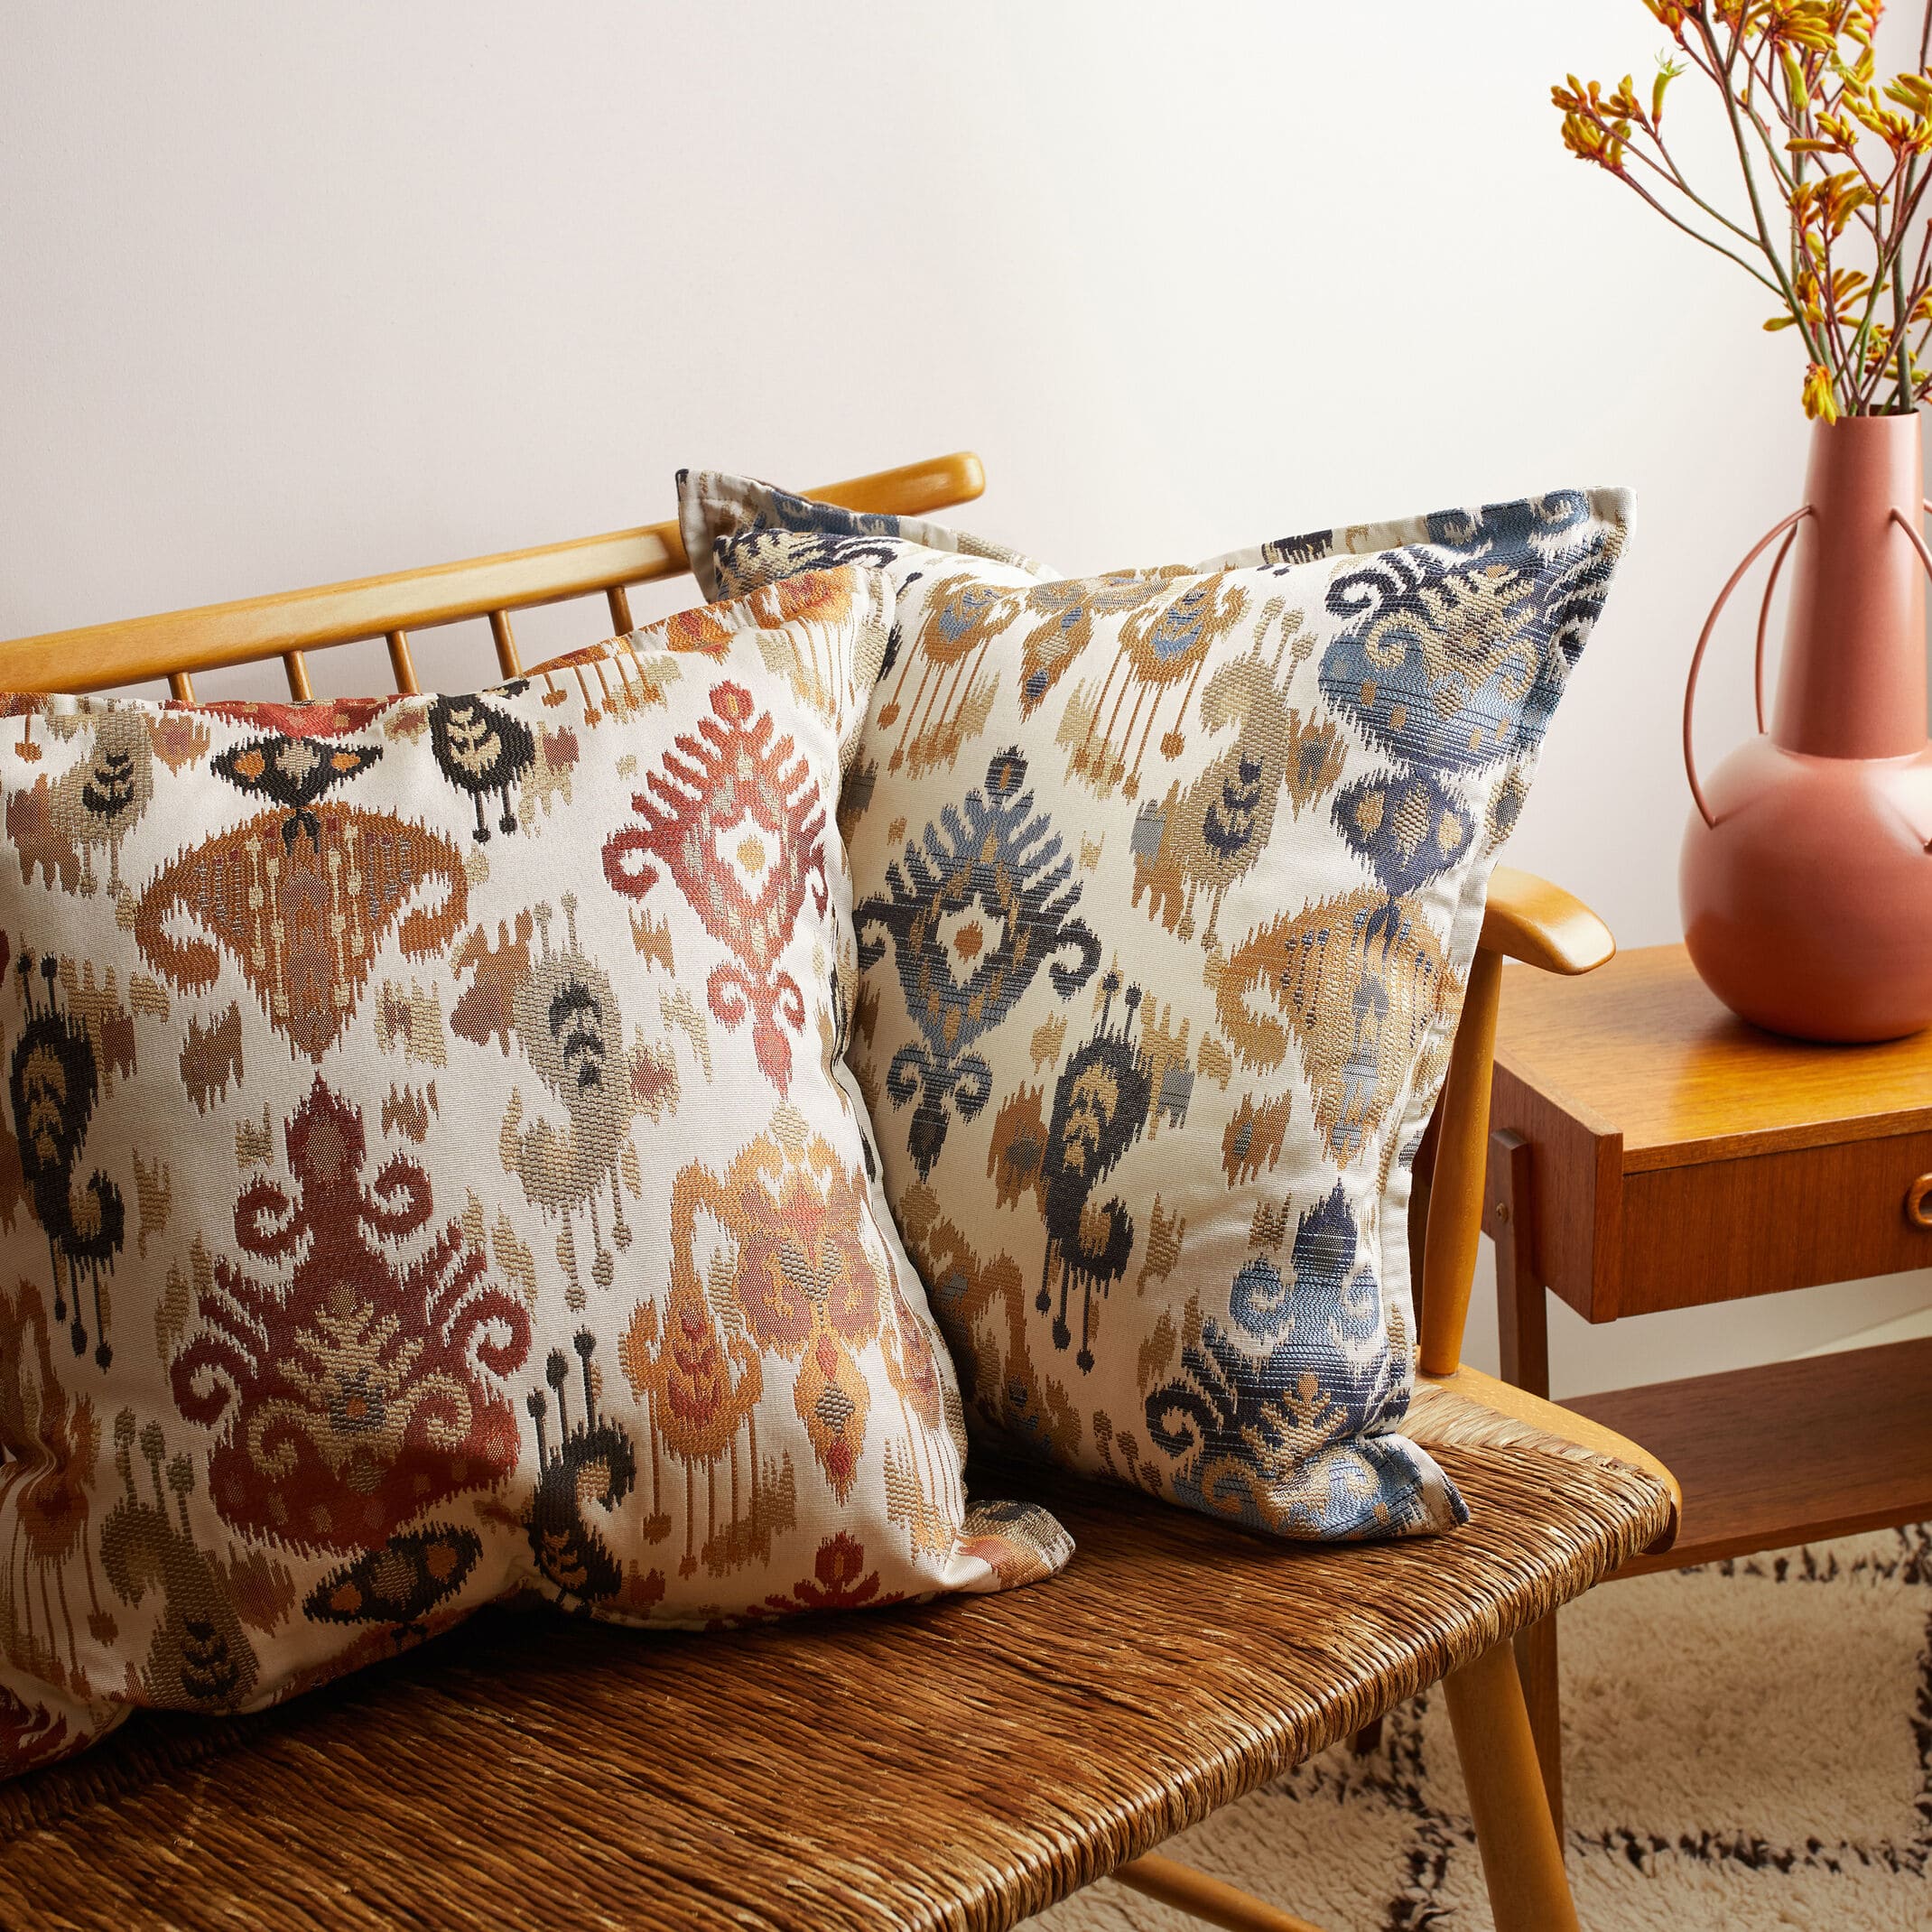 Patterened and Woven Cushions